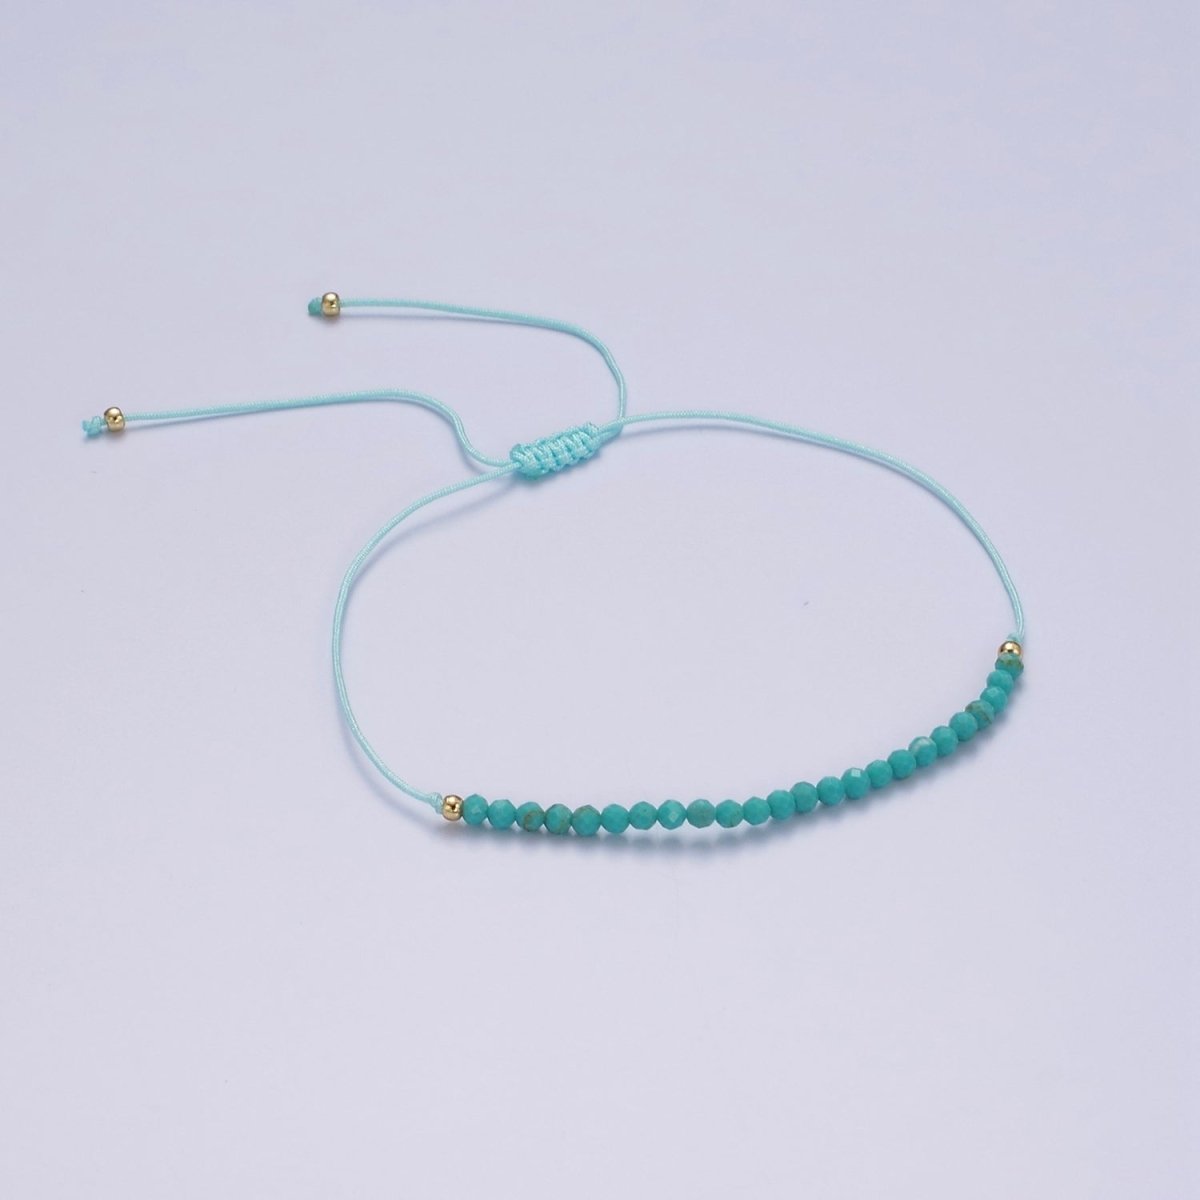 14K Gold Filled Turquoise Multifaceted Turquoise Rope Adjustable Friendship Bracelet | WA-2181 - WA-2183 Clearance Pricing - DLUXCA